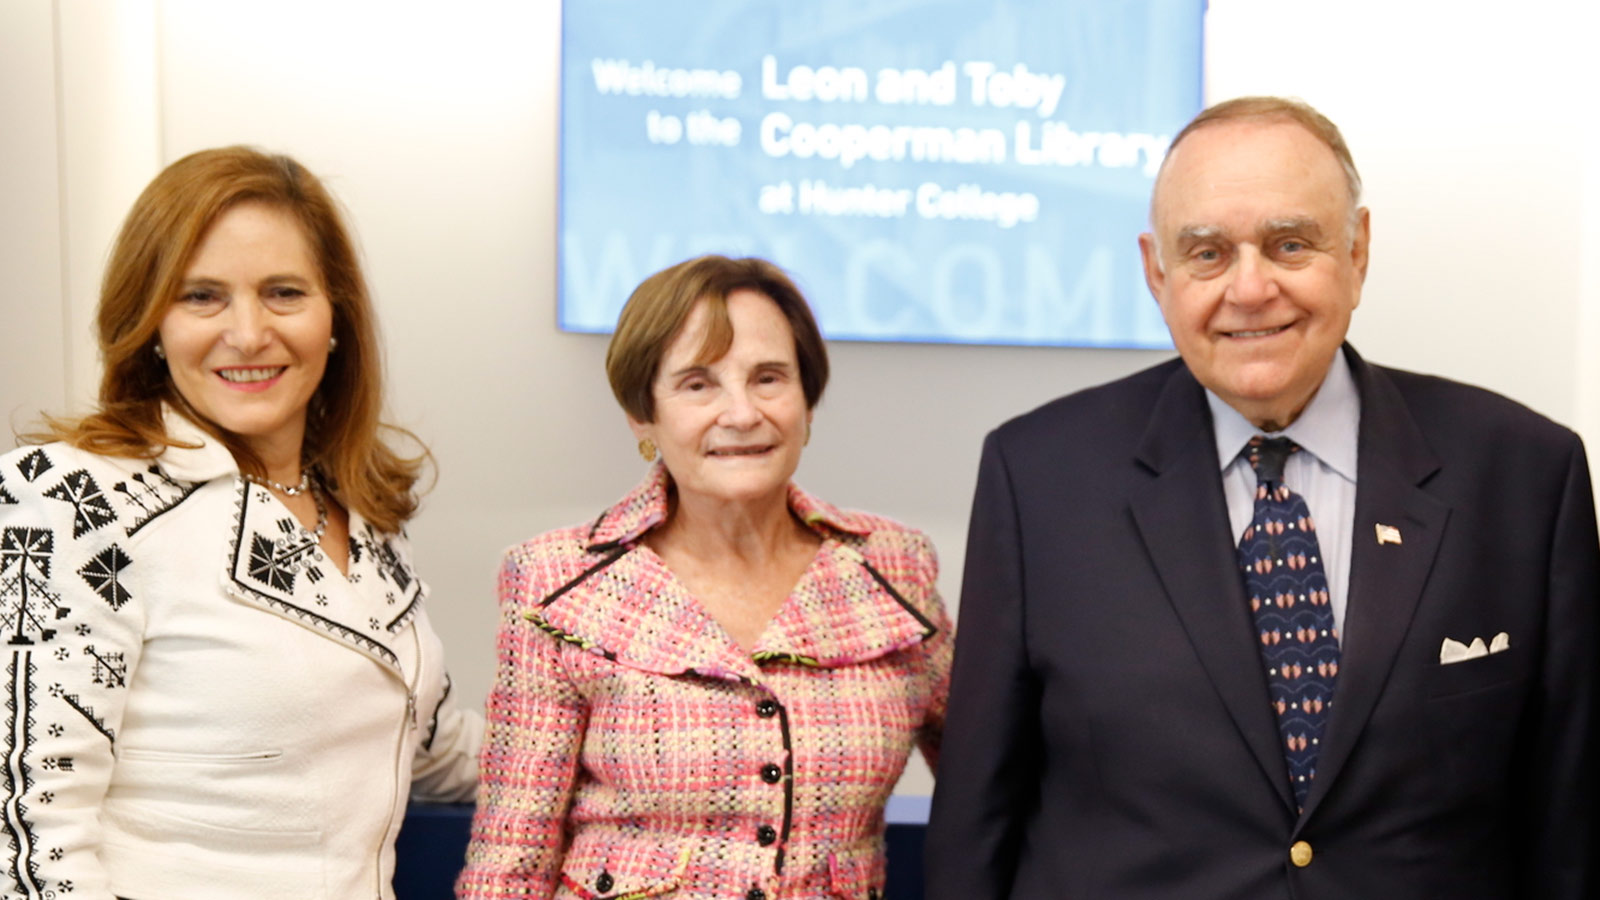 Toby and Leon Cooperman with President Raab